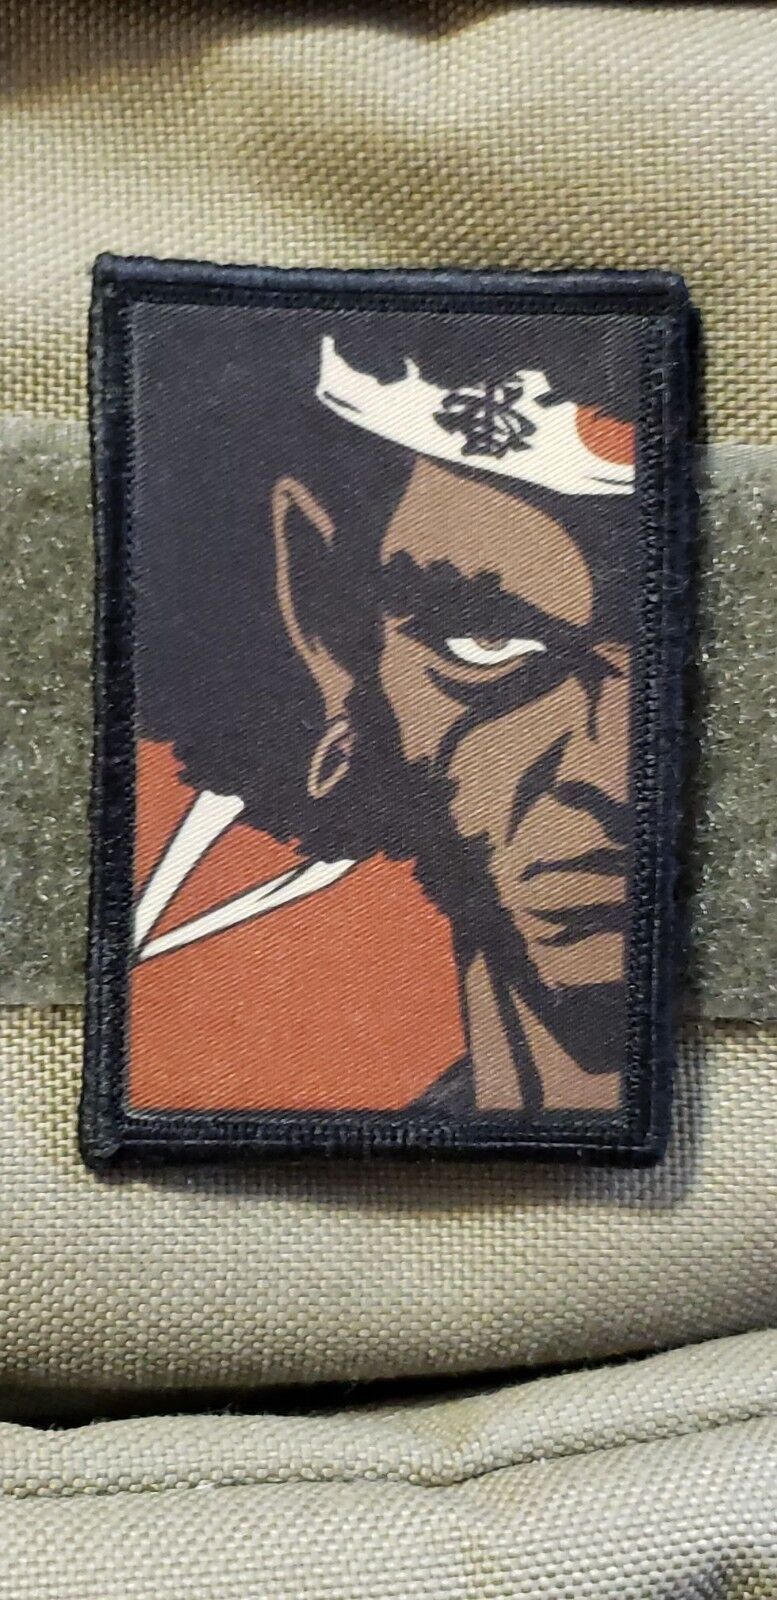 Afro Samurai Morale Patch Anime Tactical Military Tactical Army Flag USA Anime